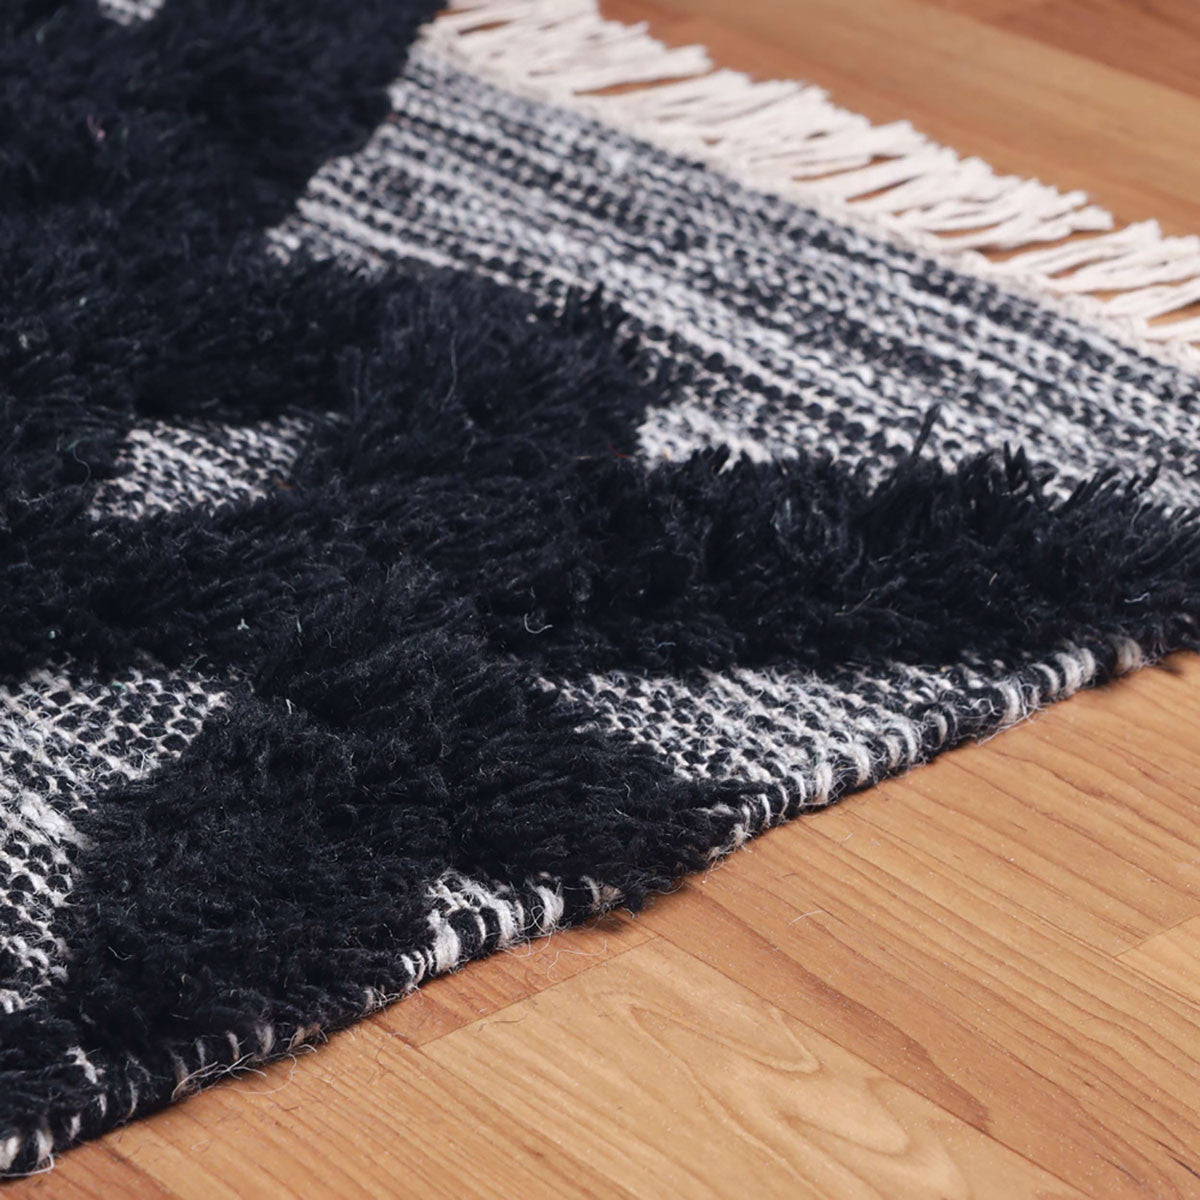 4' X 6' Black And Ivory Wool Geometric Flatweave Handmade Stain Resistant Area Rug With Fringe